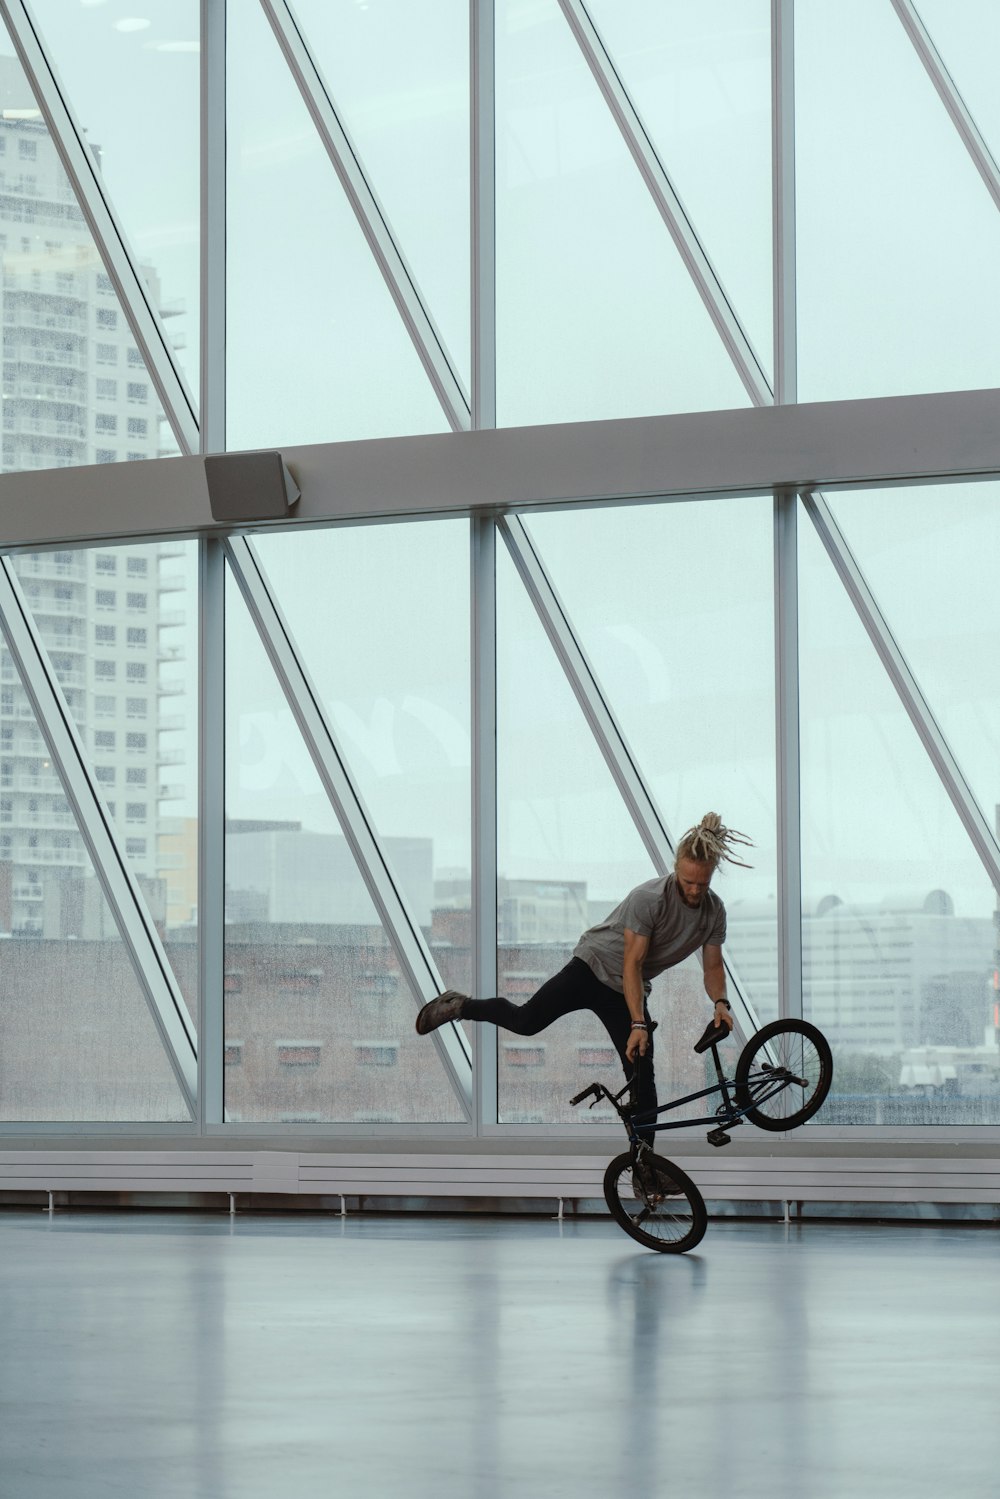 man riding bicycle doing stunts inside glass building during daytime